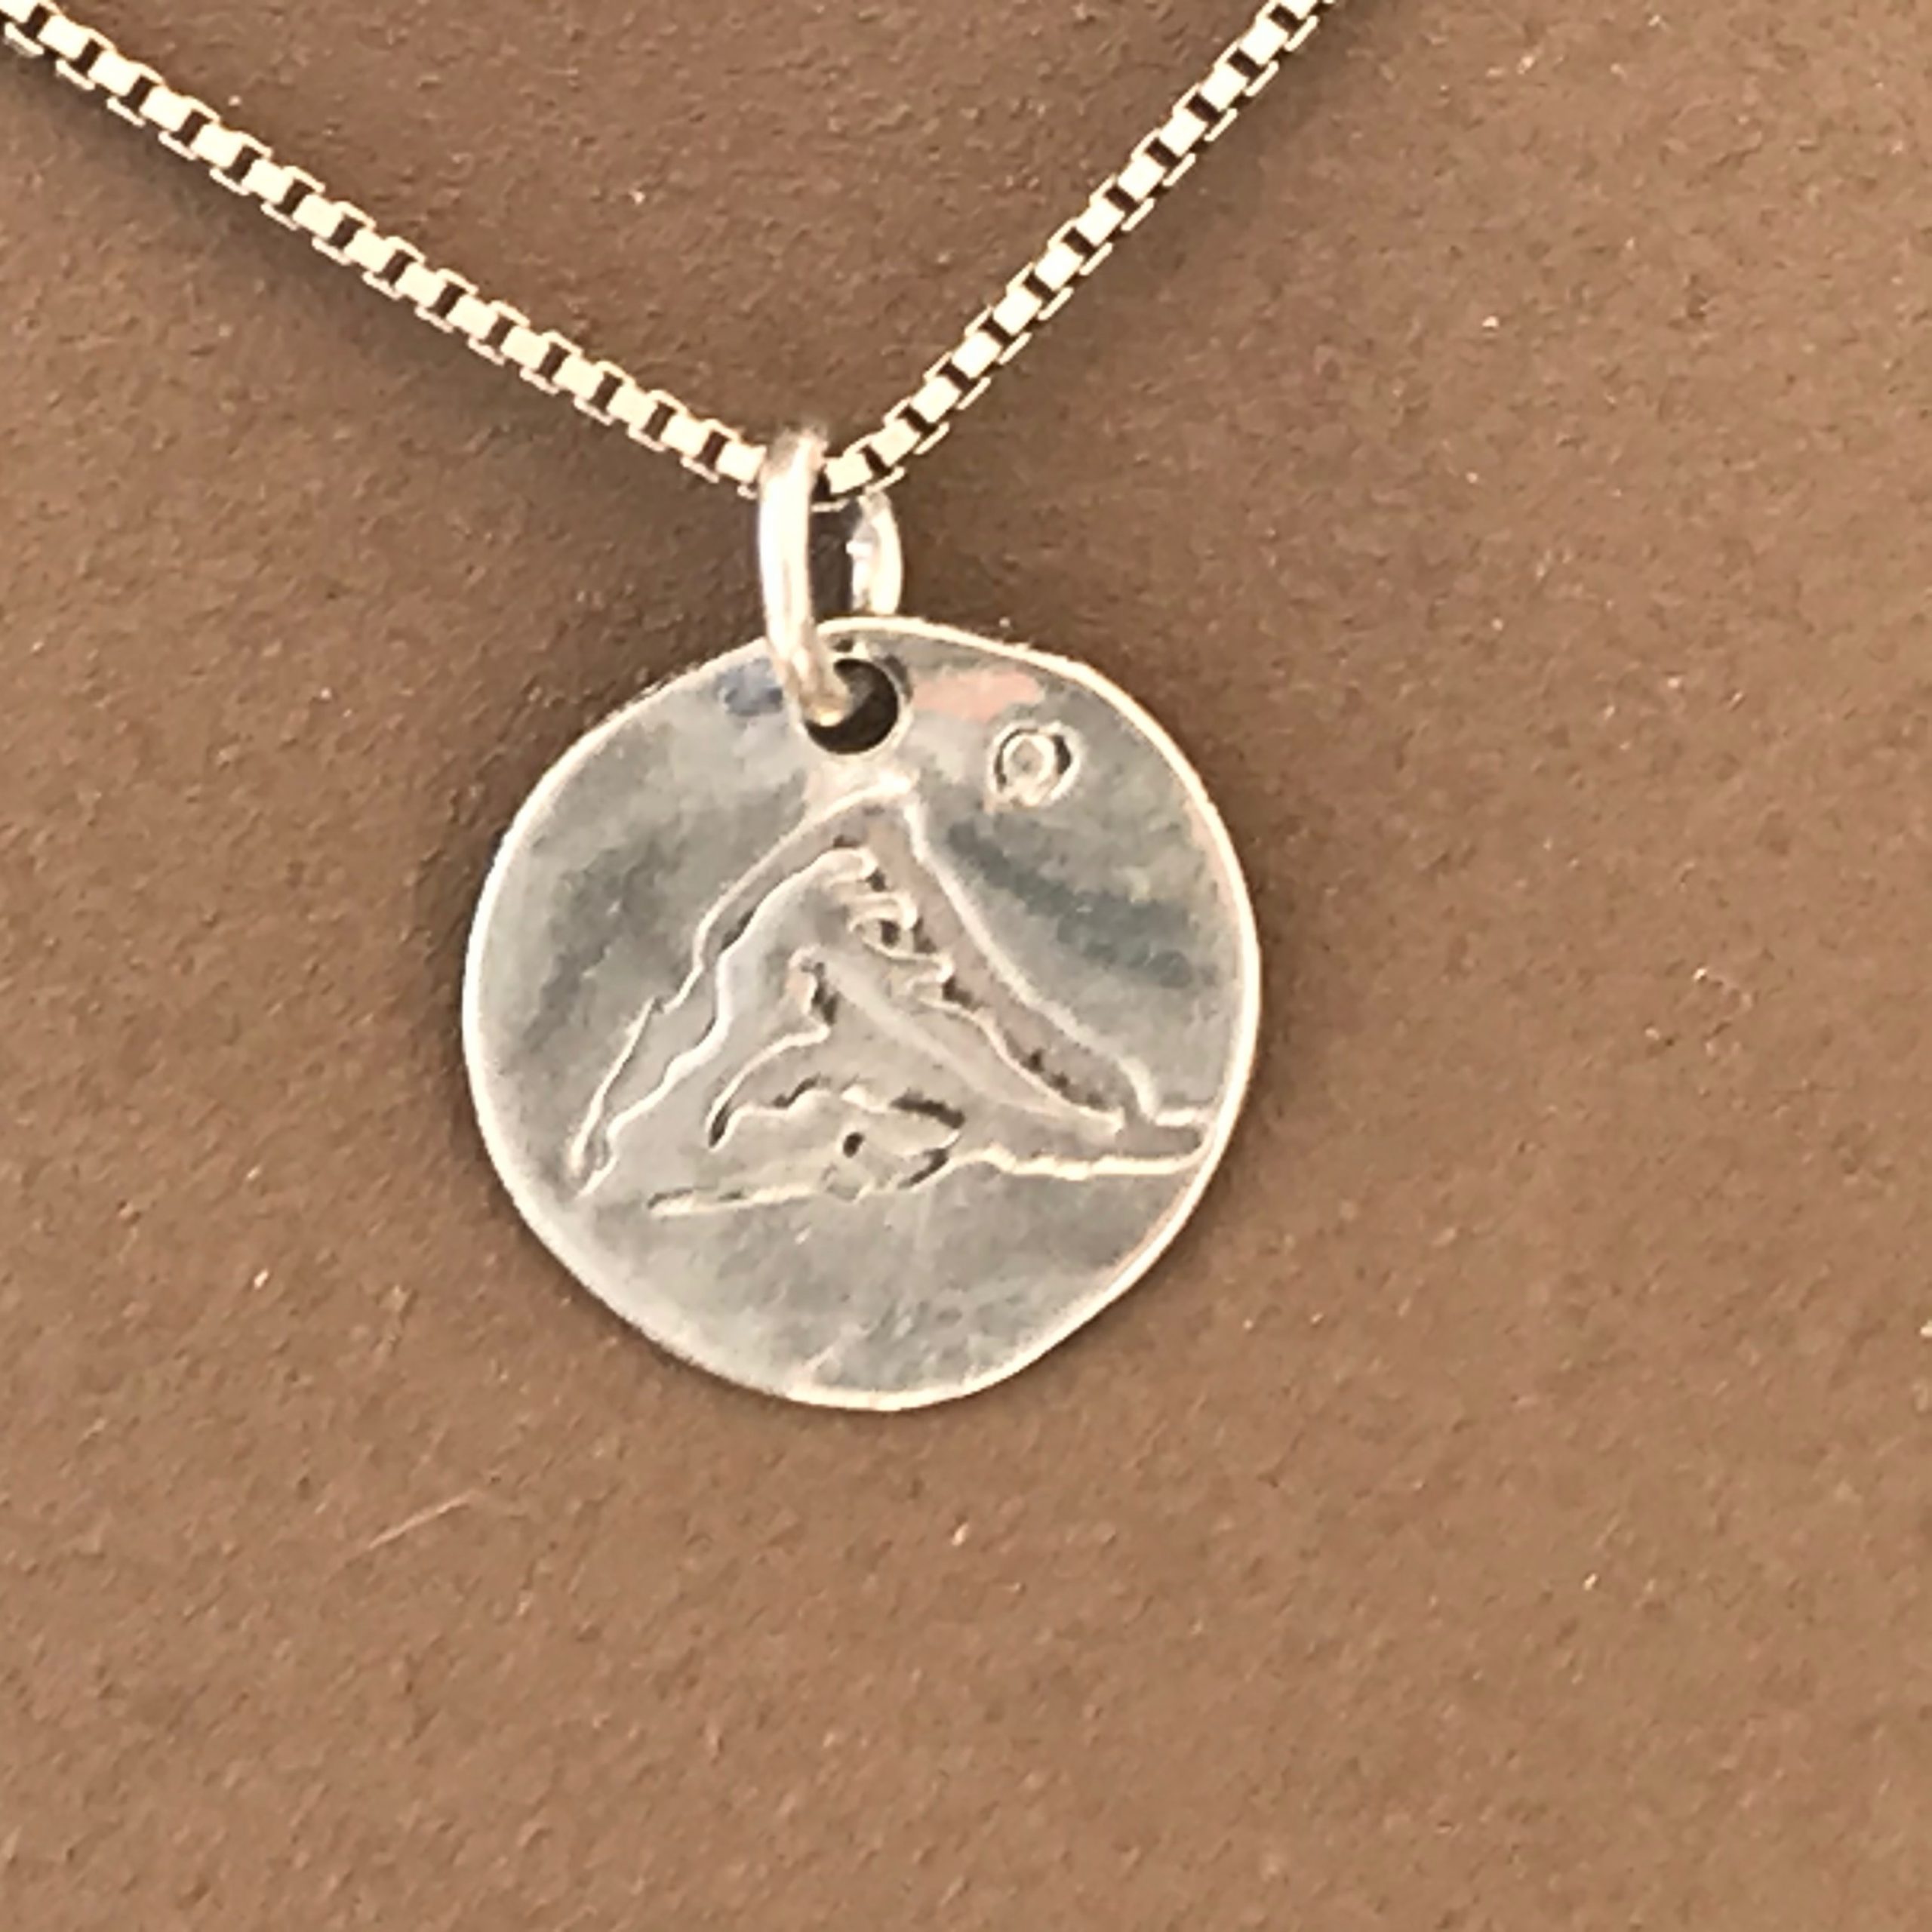 Mountain Peaks Necklace - Silver